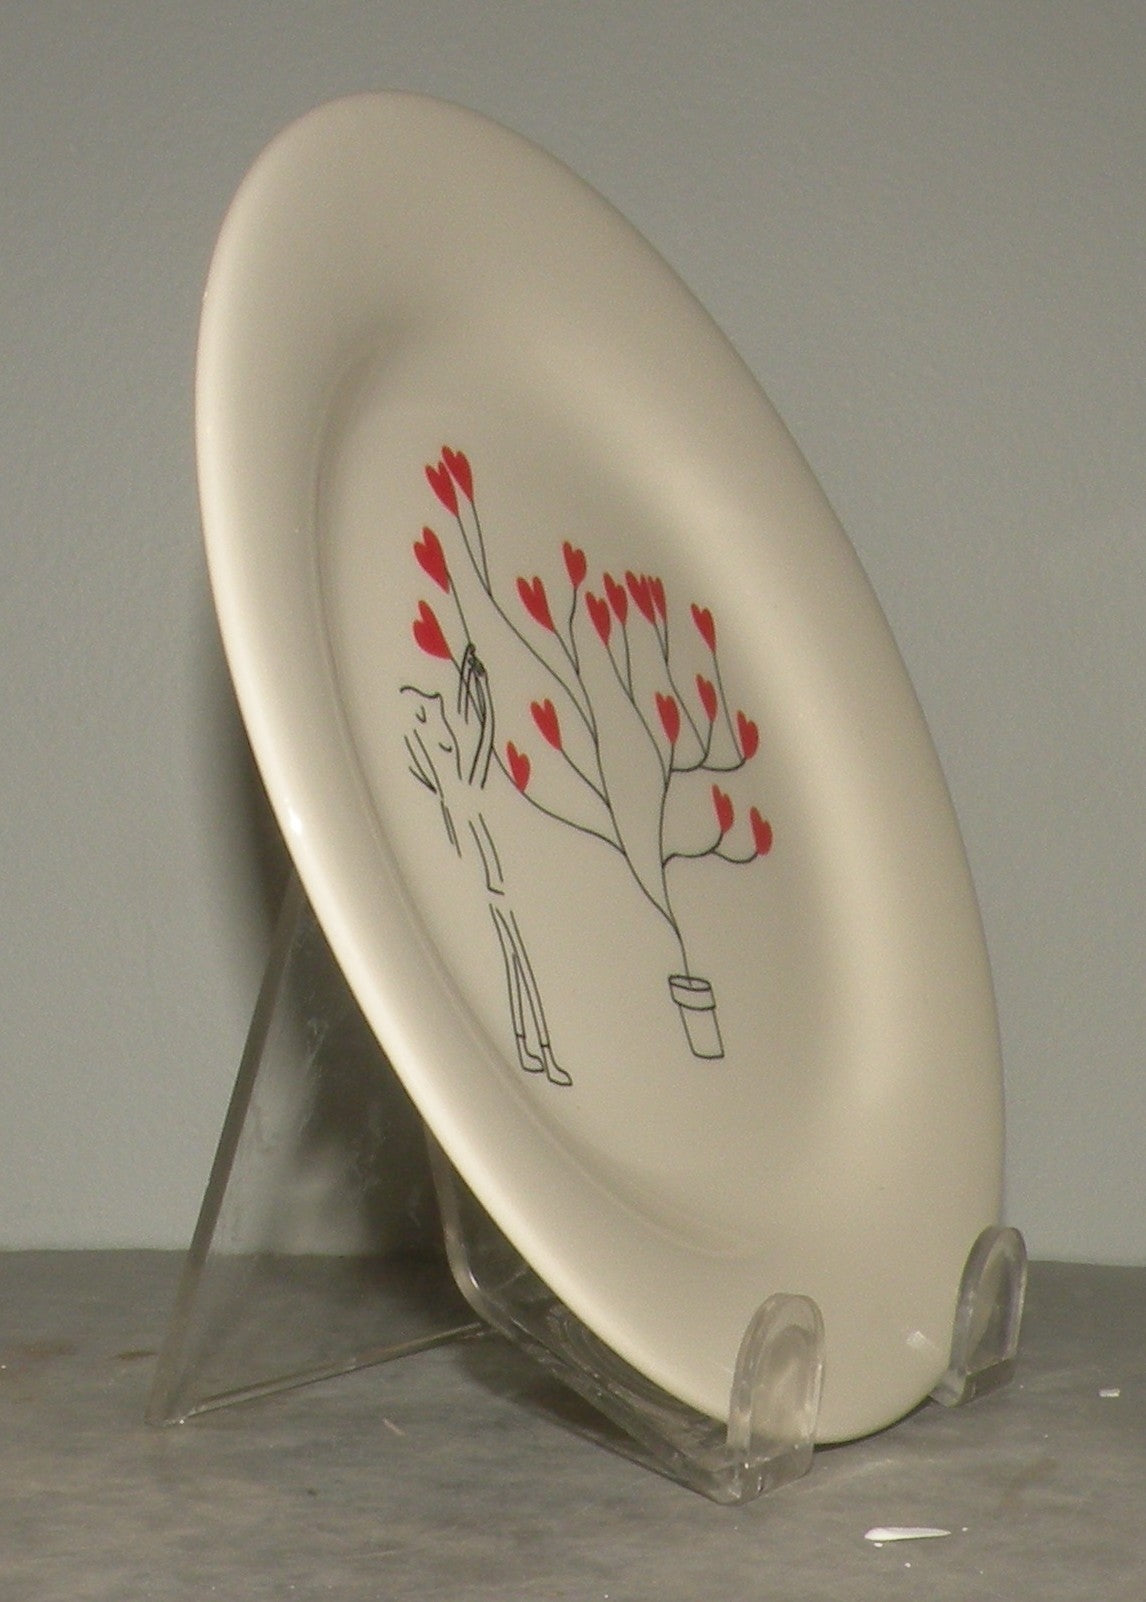 Bread & Butter Plate Tree with Hearts , Les Amoureux